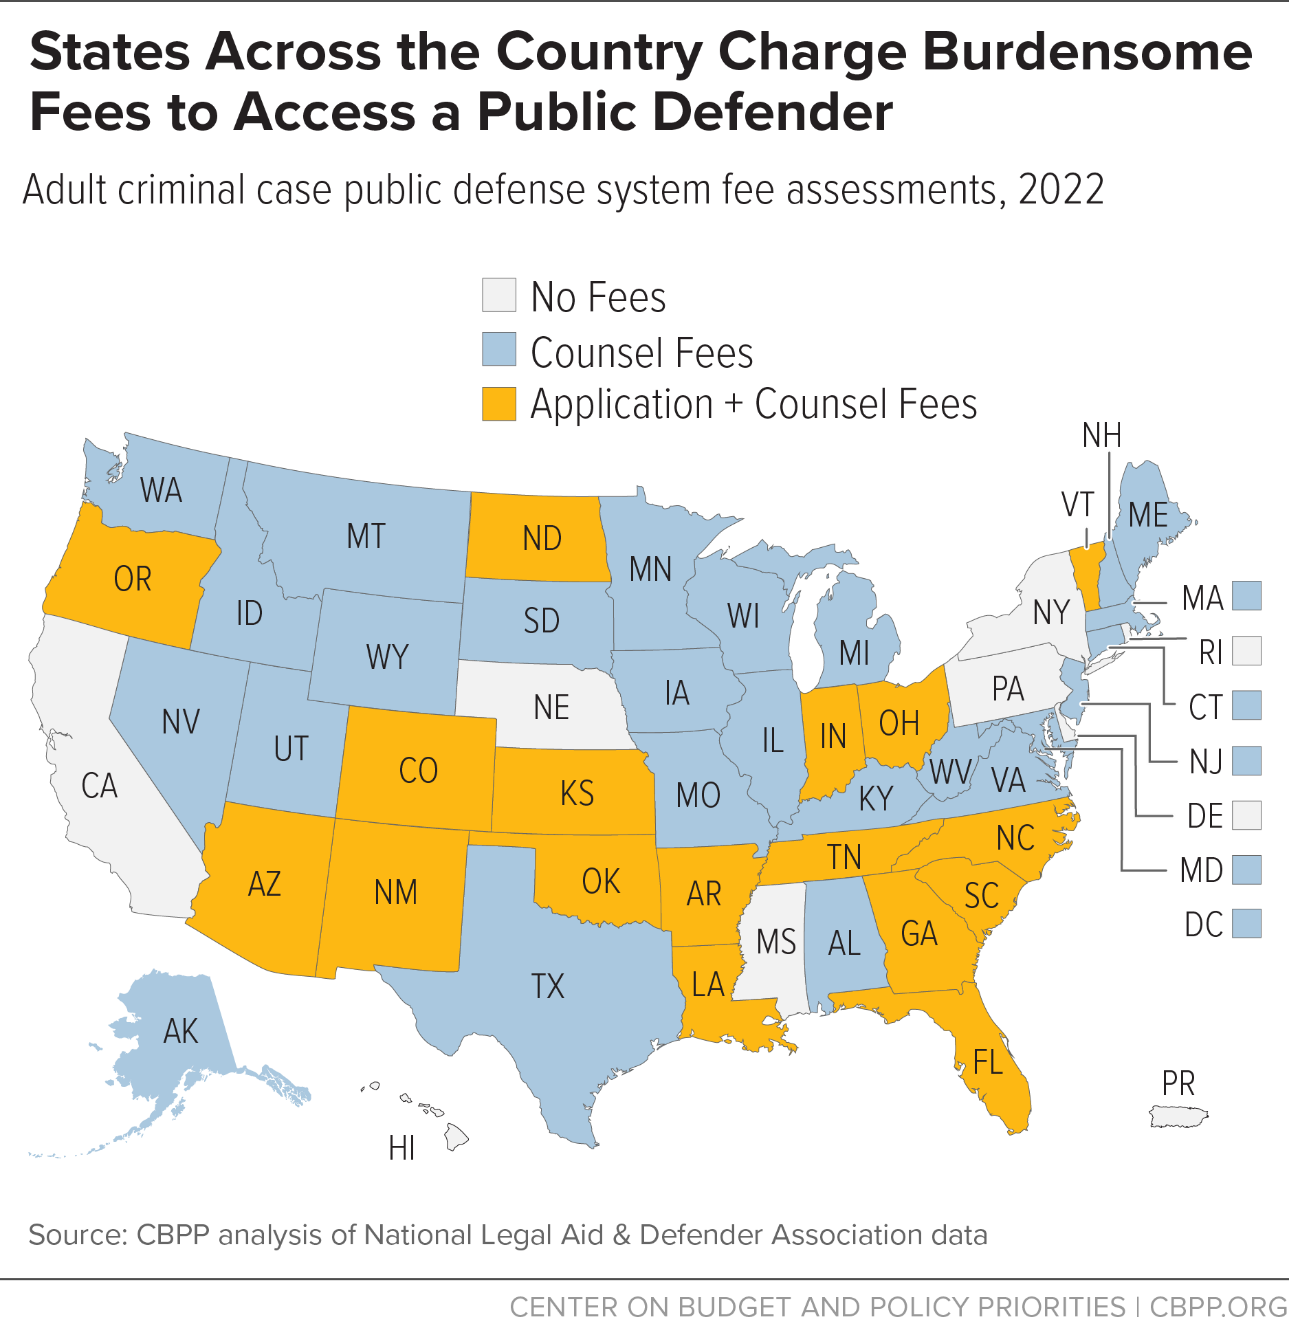 States Across the Country Charge Burdensome Fees to Access a Public Defender